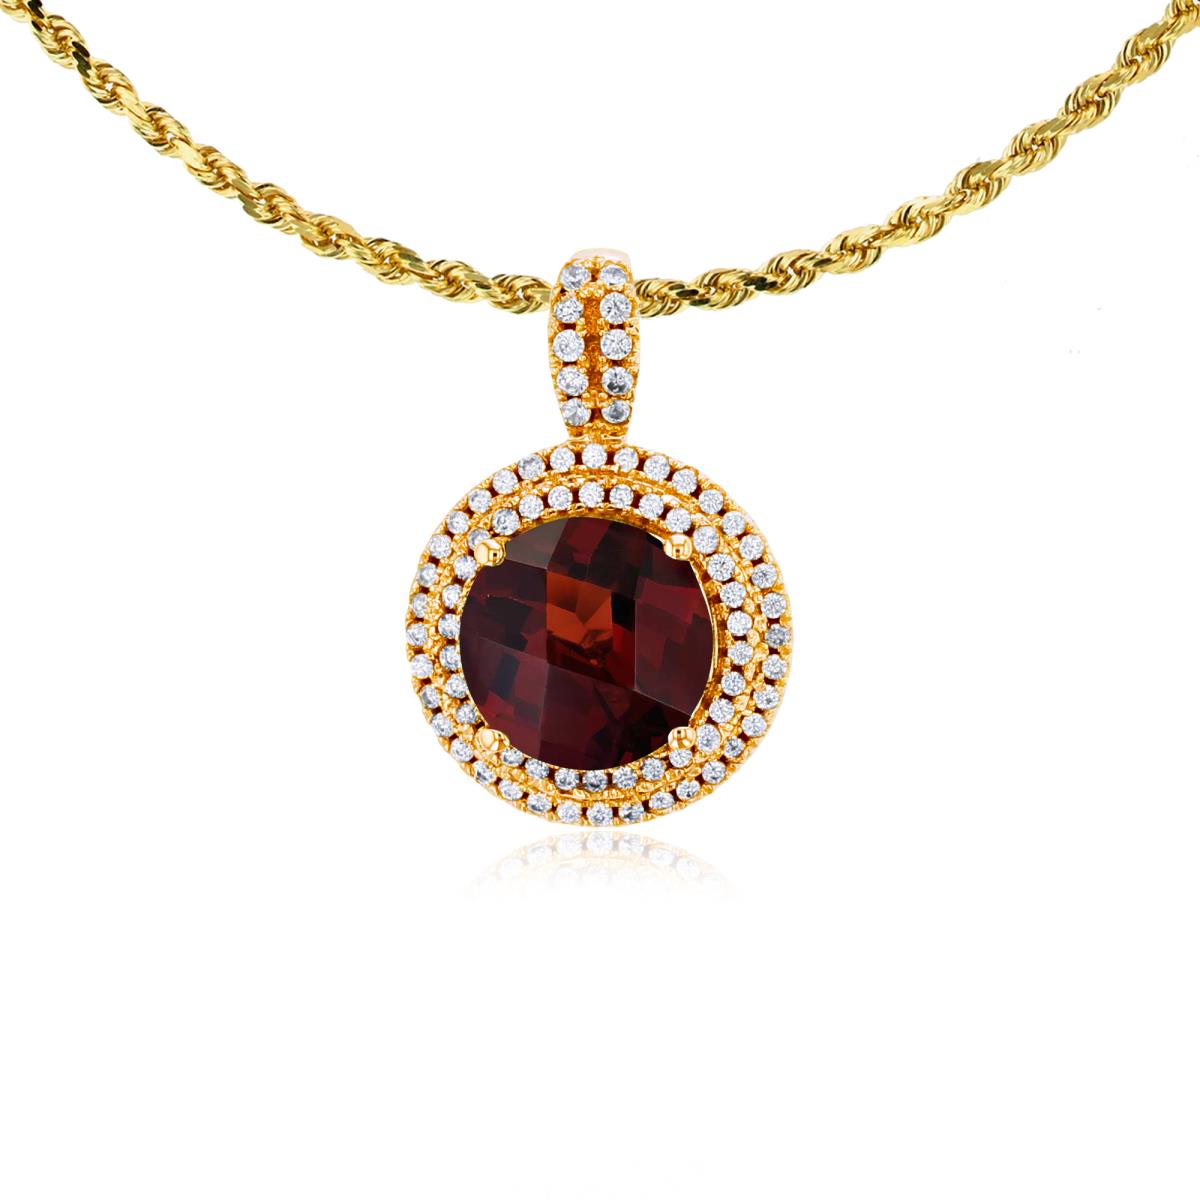 10K Yellow Gold 7mm Round Garnet & 0.25 CTTW Diamonds Double Halo 18" Rope Chain Necklace